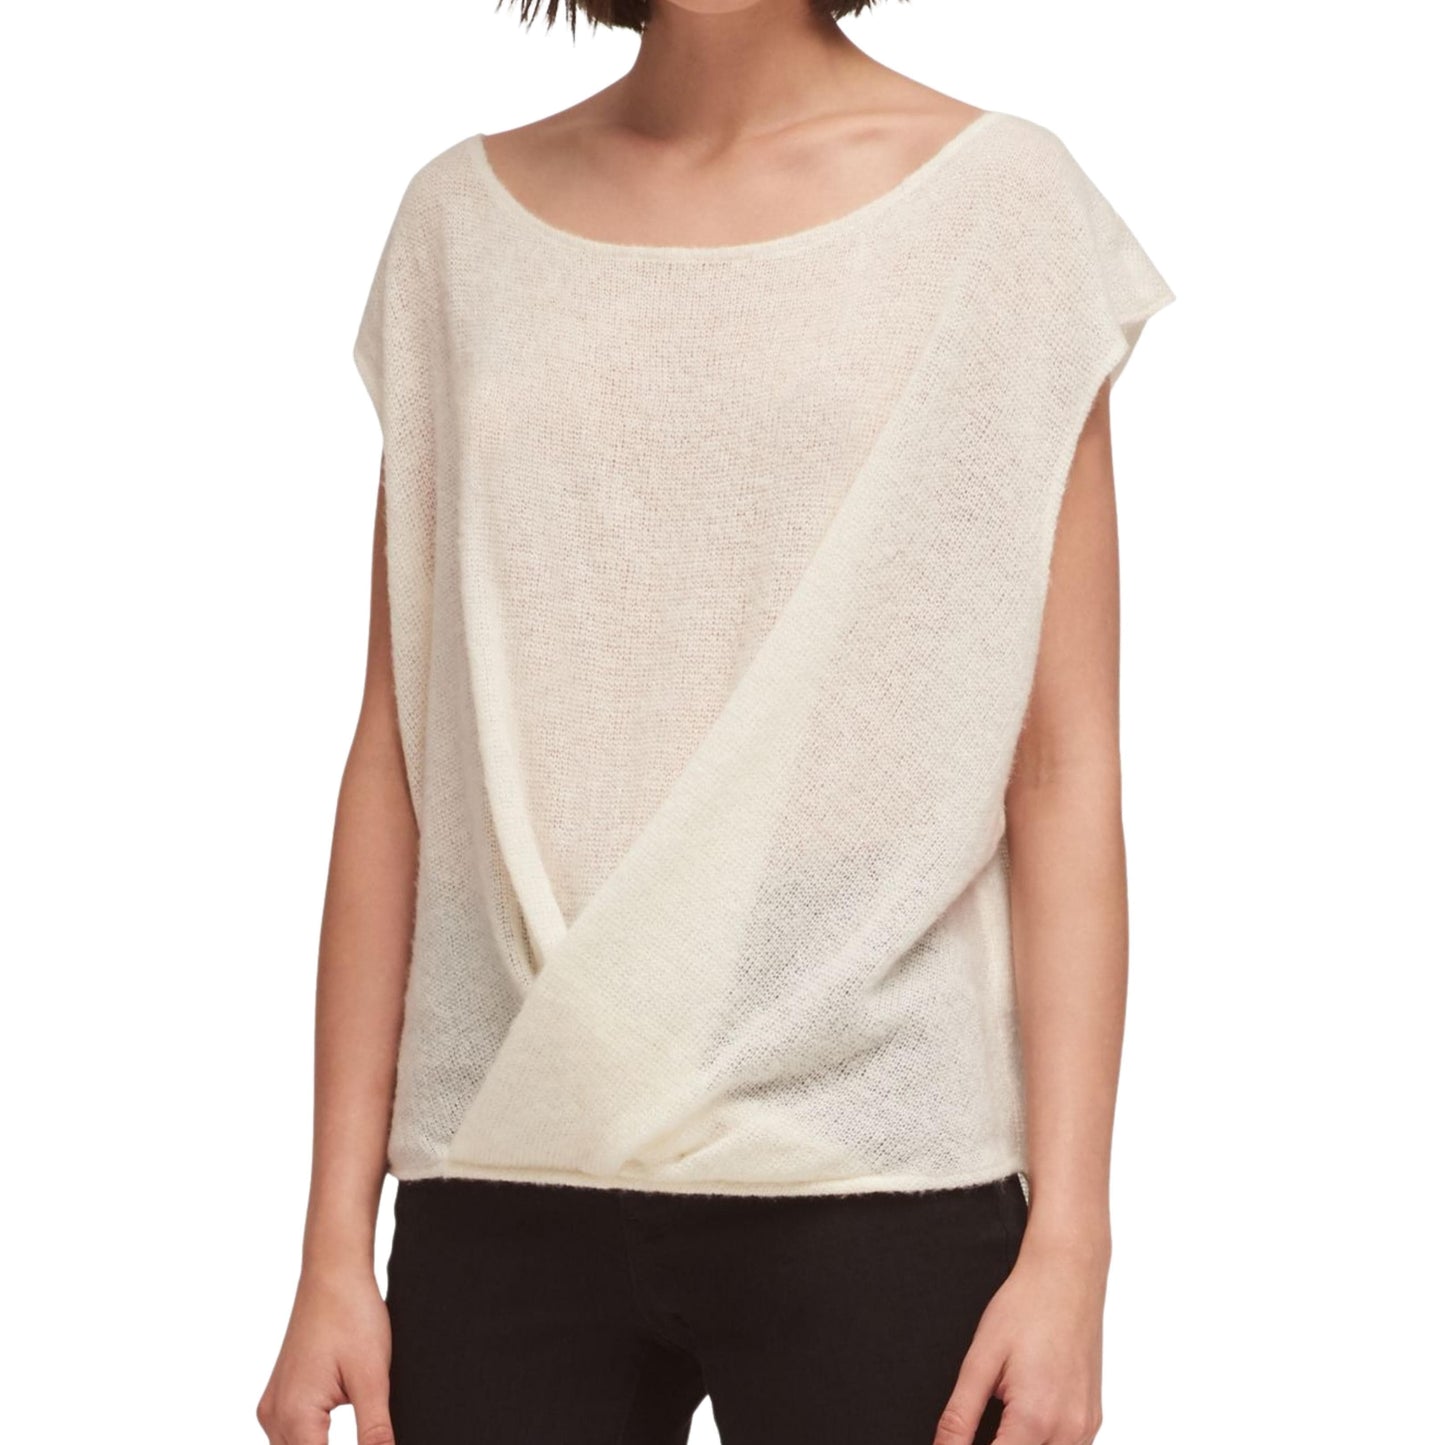 DKNY Womens Tops M / Off-White DKNY - Front Scoop Neck Sweater